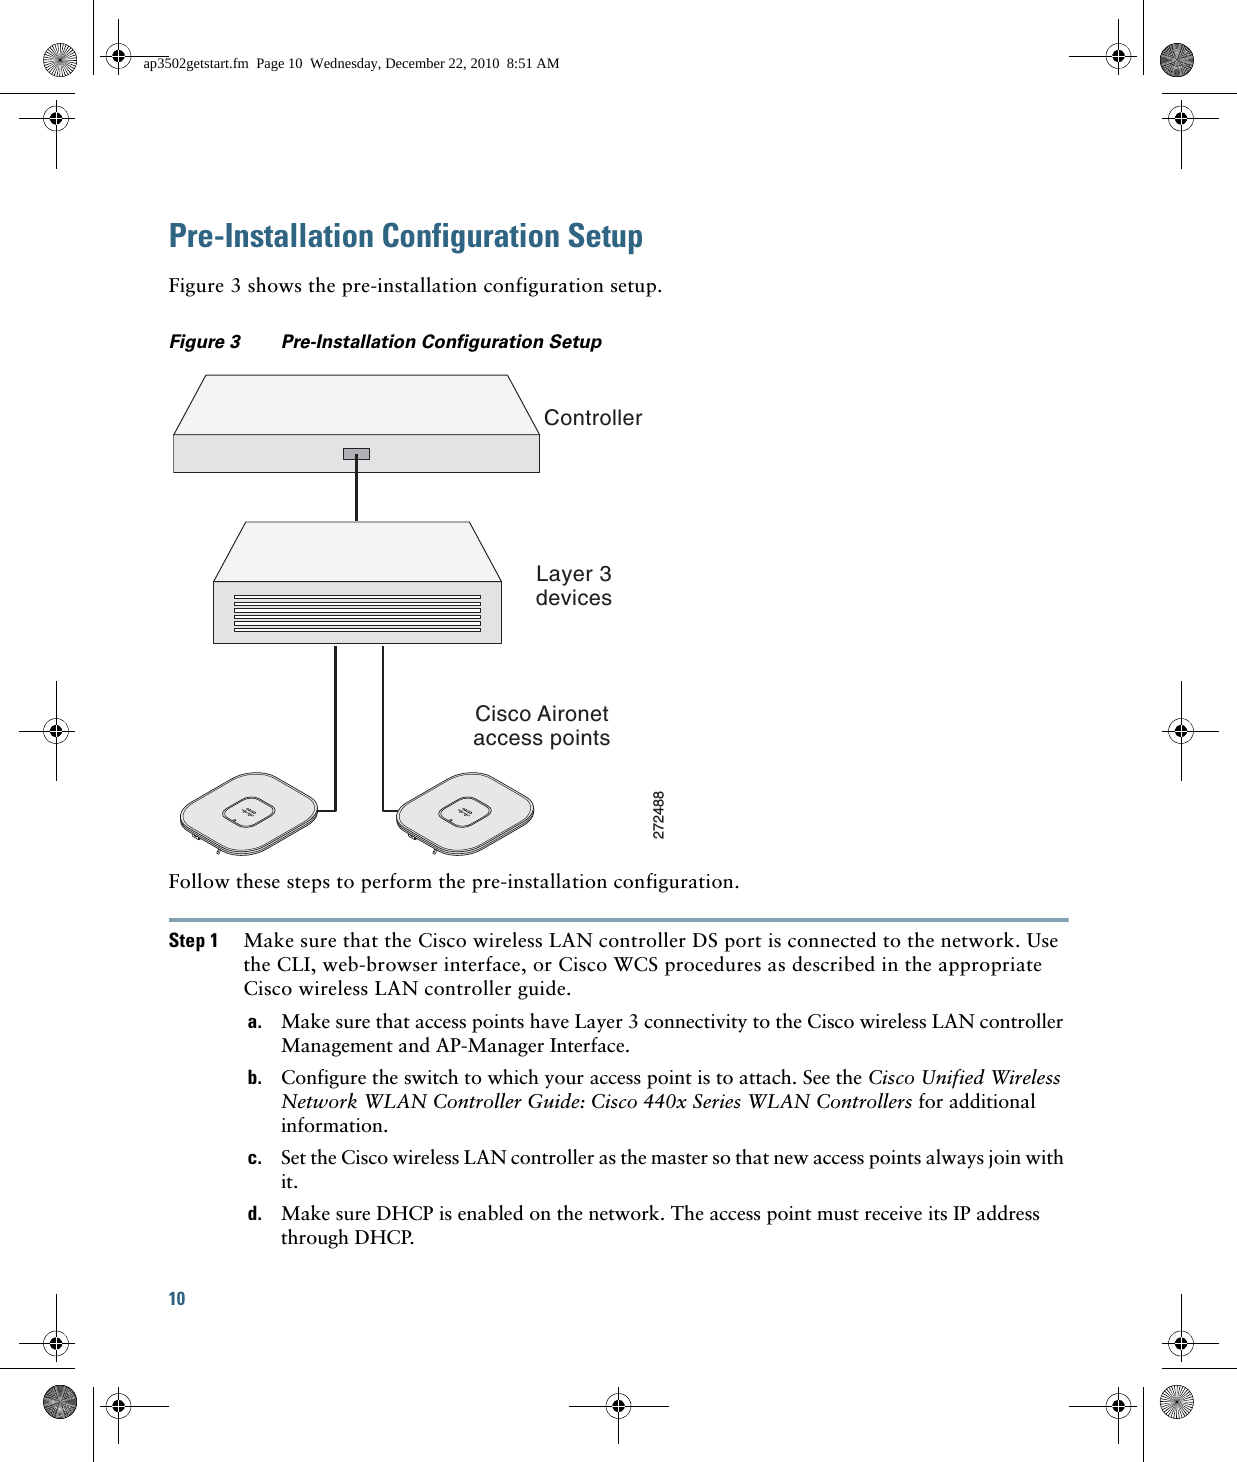 10 Pre-Installation Configuration SetupFigure 3 shows the pre-installation configuration setup.Figure 3 Pre-Installation Configuration Setup Follow these steps to perform the pre-installation configuration.Step 1 Make sure that the Cisco wireless LAN controller DS port is connected to the network. Use the CLI, web-browser interface, or Cisco WCS procedures as described in the appropriate Cisco wireless LAN controller guide.a. Make sure that access points have Layer 3 connectivity to the Cisco wireless LAN controller Management and AP-Manager Interface.b. Configure the switch to which your access point is to attach. See the Cisco Unified Wireless Network WLAN Controller Guide: Cisco 440x Series WLAN Controllers for additional information.c. Set the Cisco wireless LAN controller as the master so that new access points always join with it.d. Make sure DHCP is enabled on the network. The access point must receive its IP address through DHCP.ControllerLayer 3devicesCisco Aironetaccess points272488ap3502getstart.fm  Page 10  Wednesday, December 22, 2010  8:51 AM